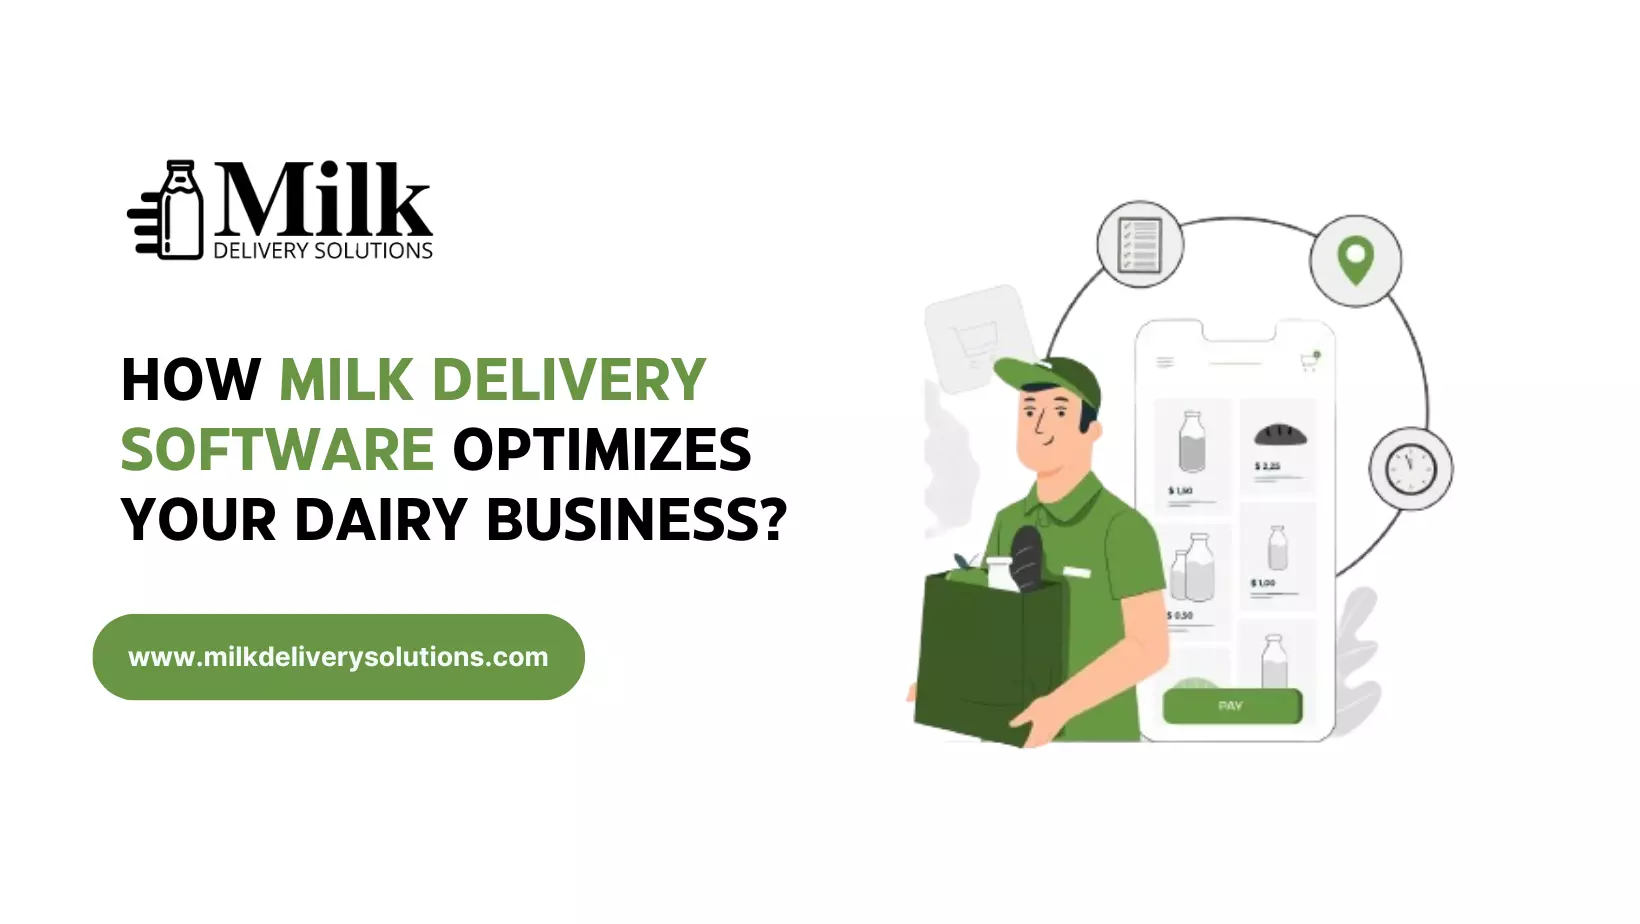 How Milk Delivery Software Optimizes Your Dairy Business?